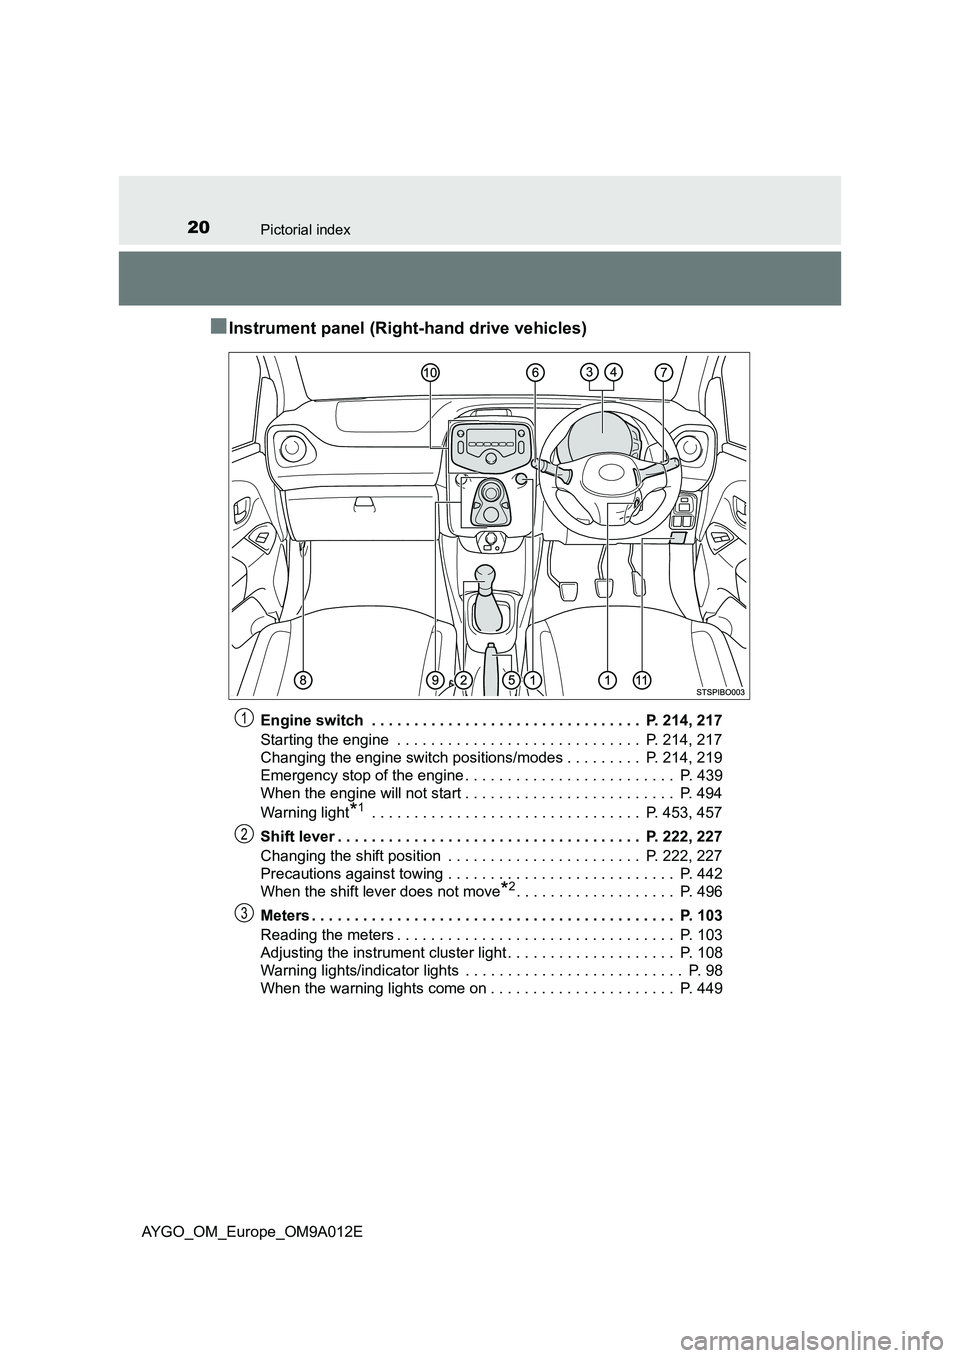 TOYOTA AYGO 2021  Owners Manual 20Pictorial index
AYGO_OM_Europe_OM9A012E
■Instrument panel (Right-hand drive vehicles)
Engine switch  . . . . . . . . . . . . . . . . . . . . . . . . . . . . . . . .  P. 214, 217
Starting the engin